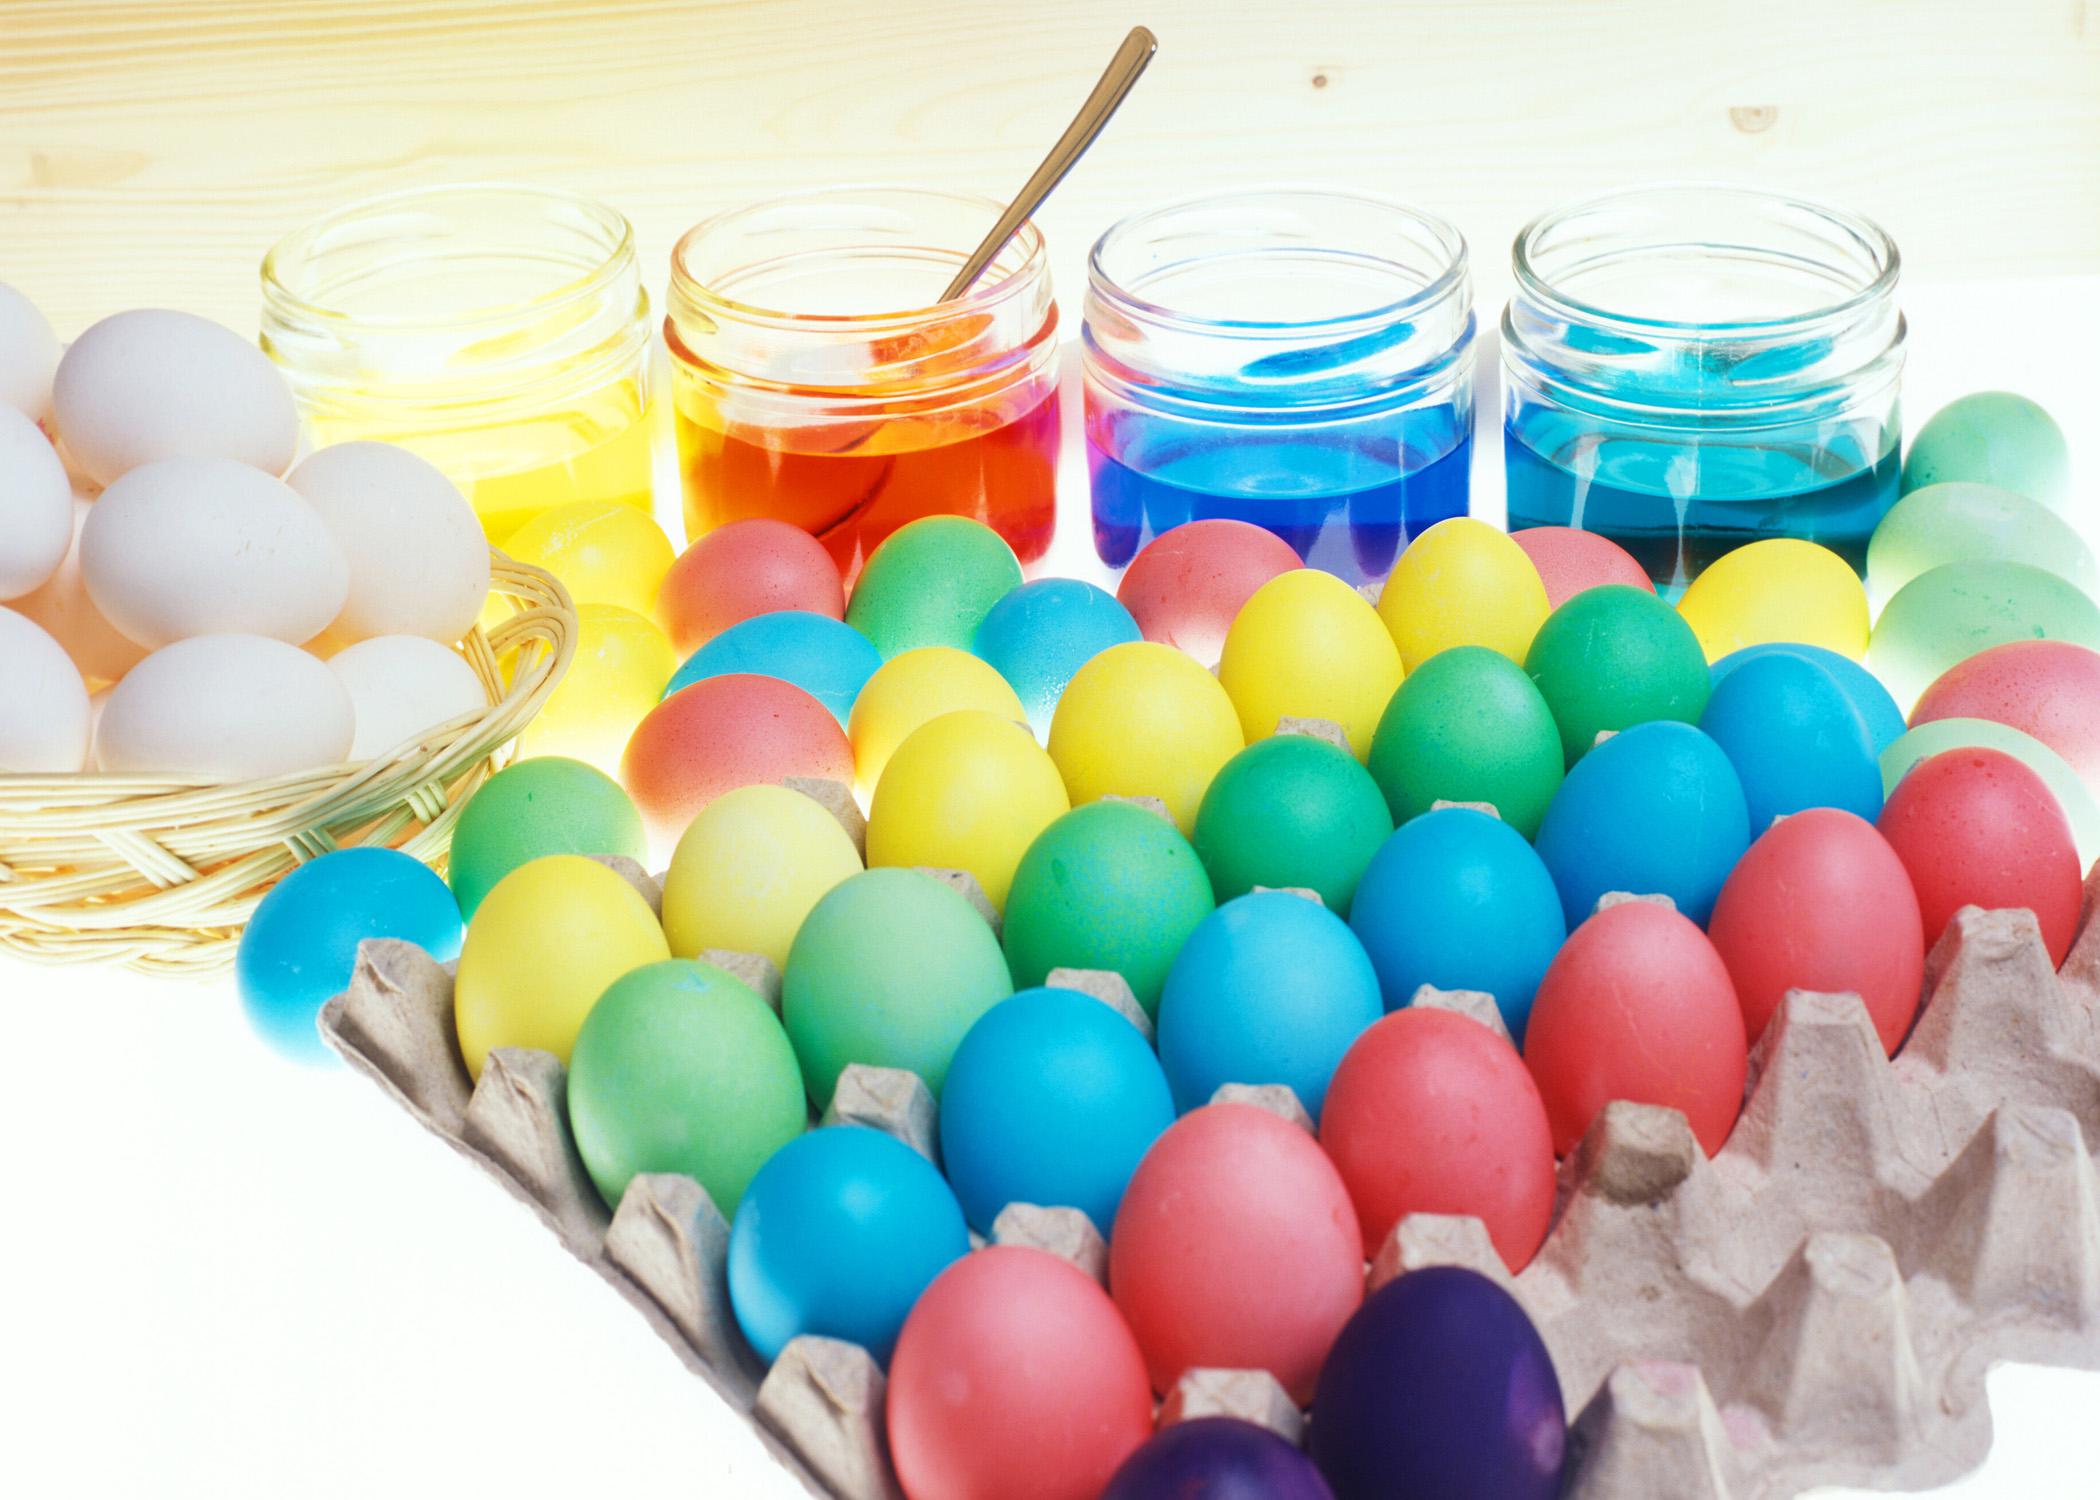 Dye, eggs and dyed eggs on a counter.